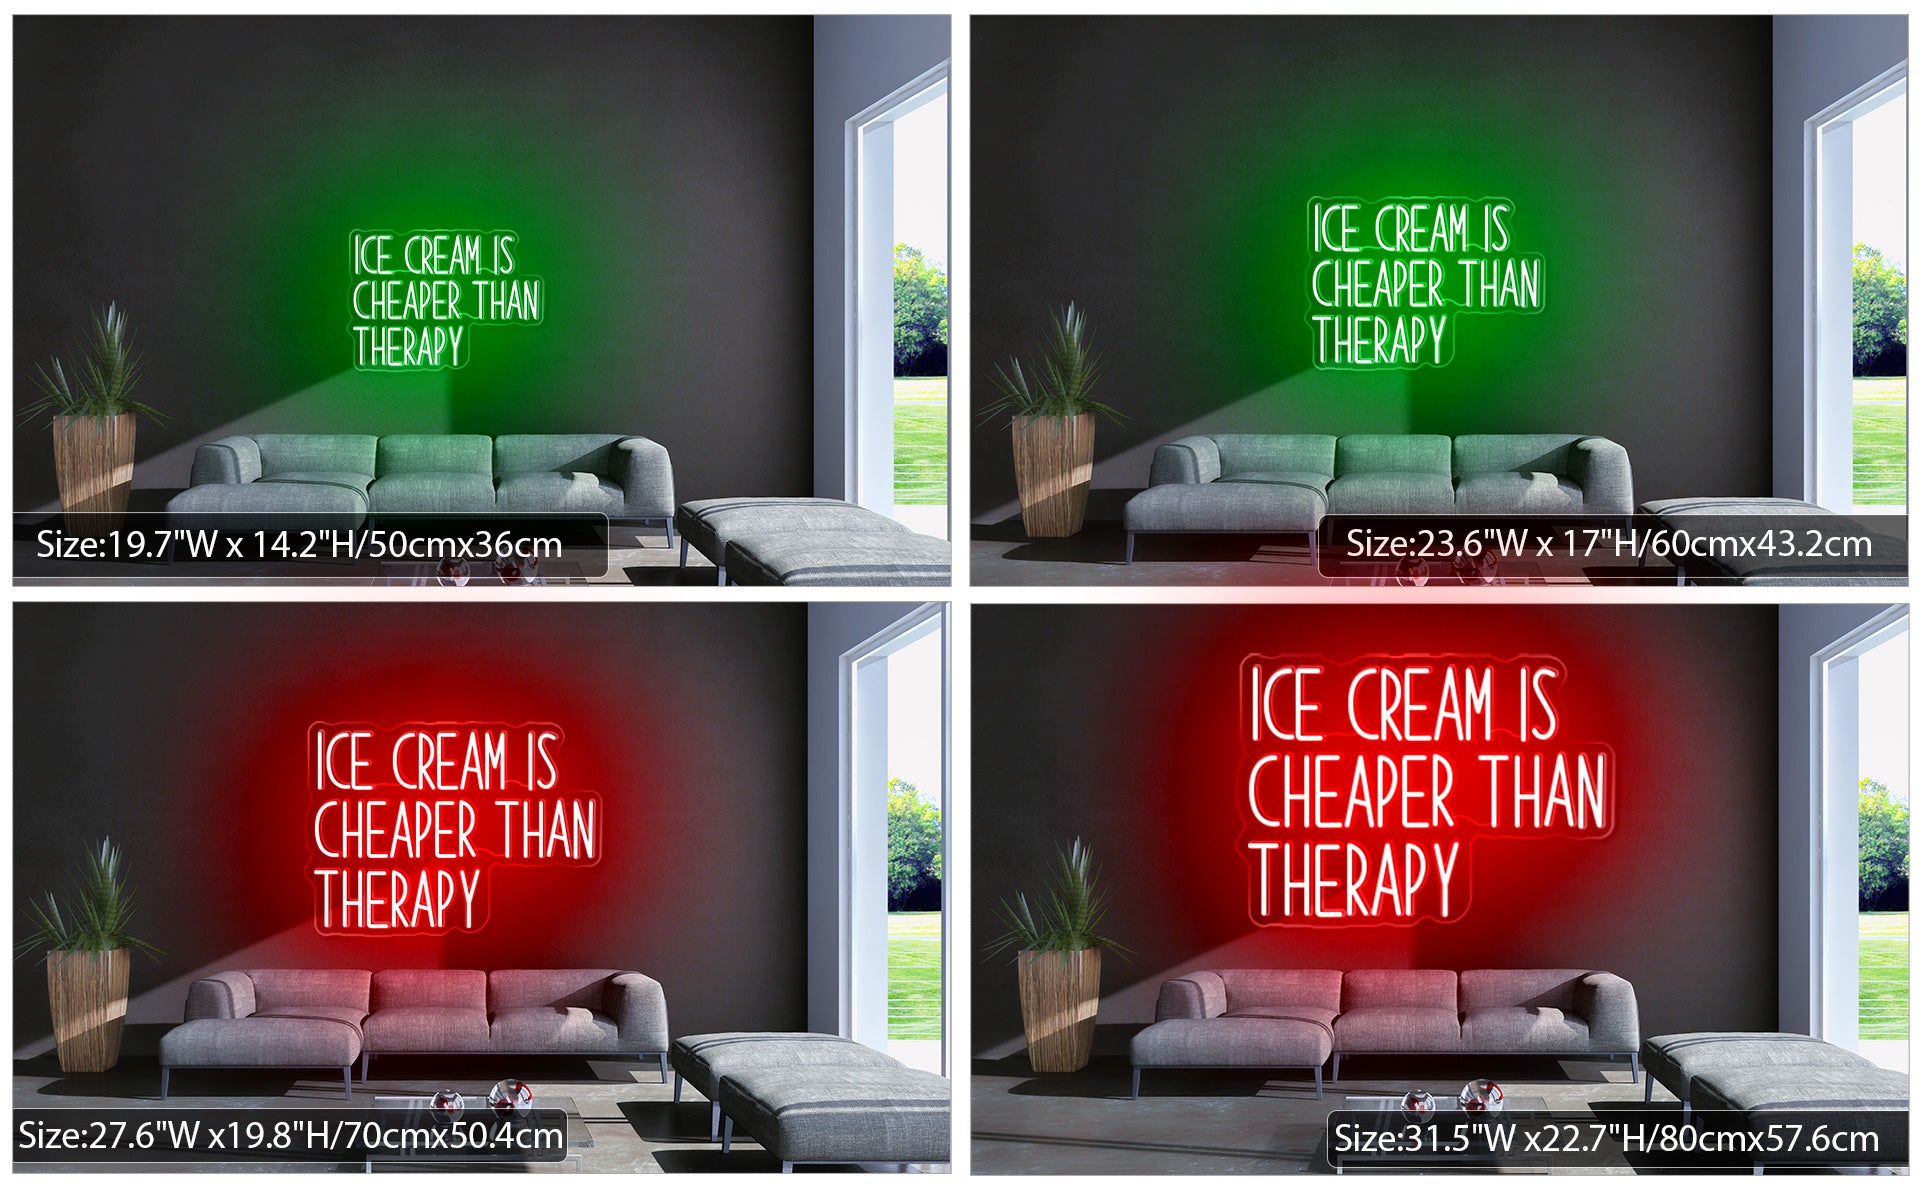 Ice cream is cheaper than therapy Neon light sign